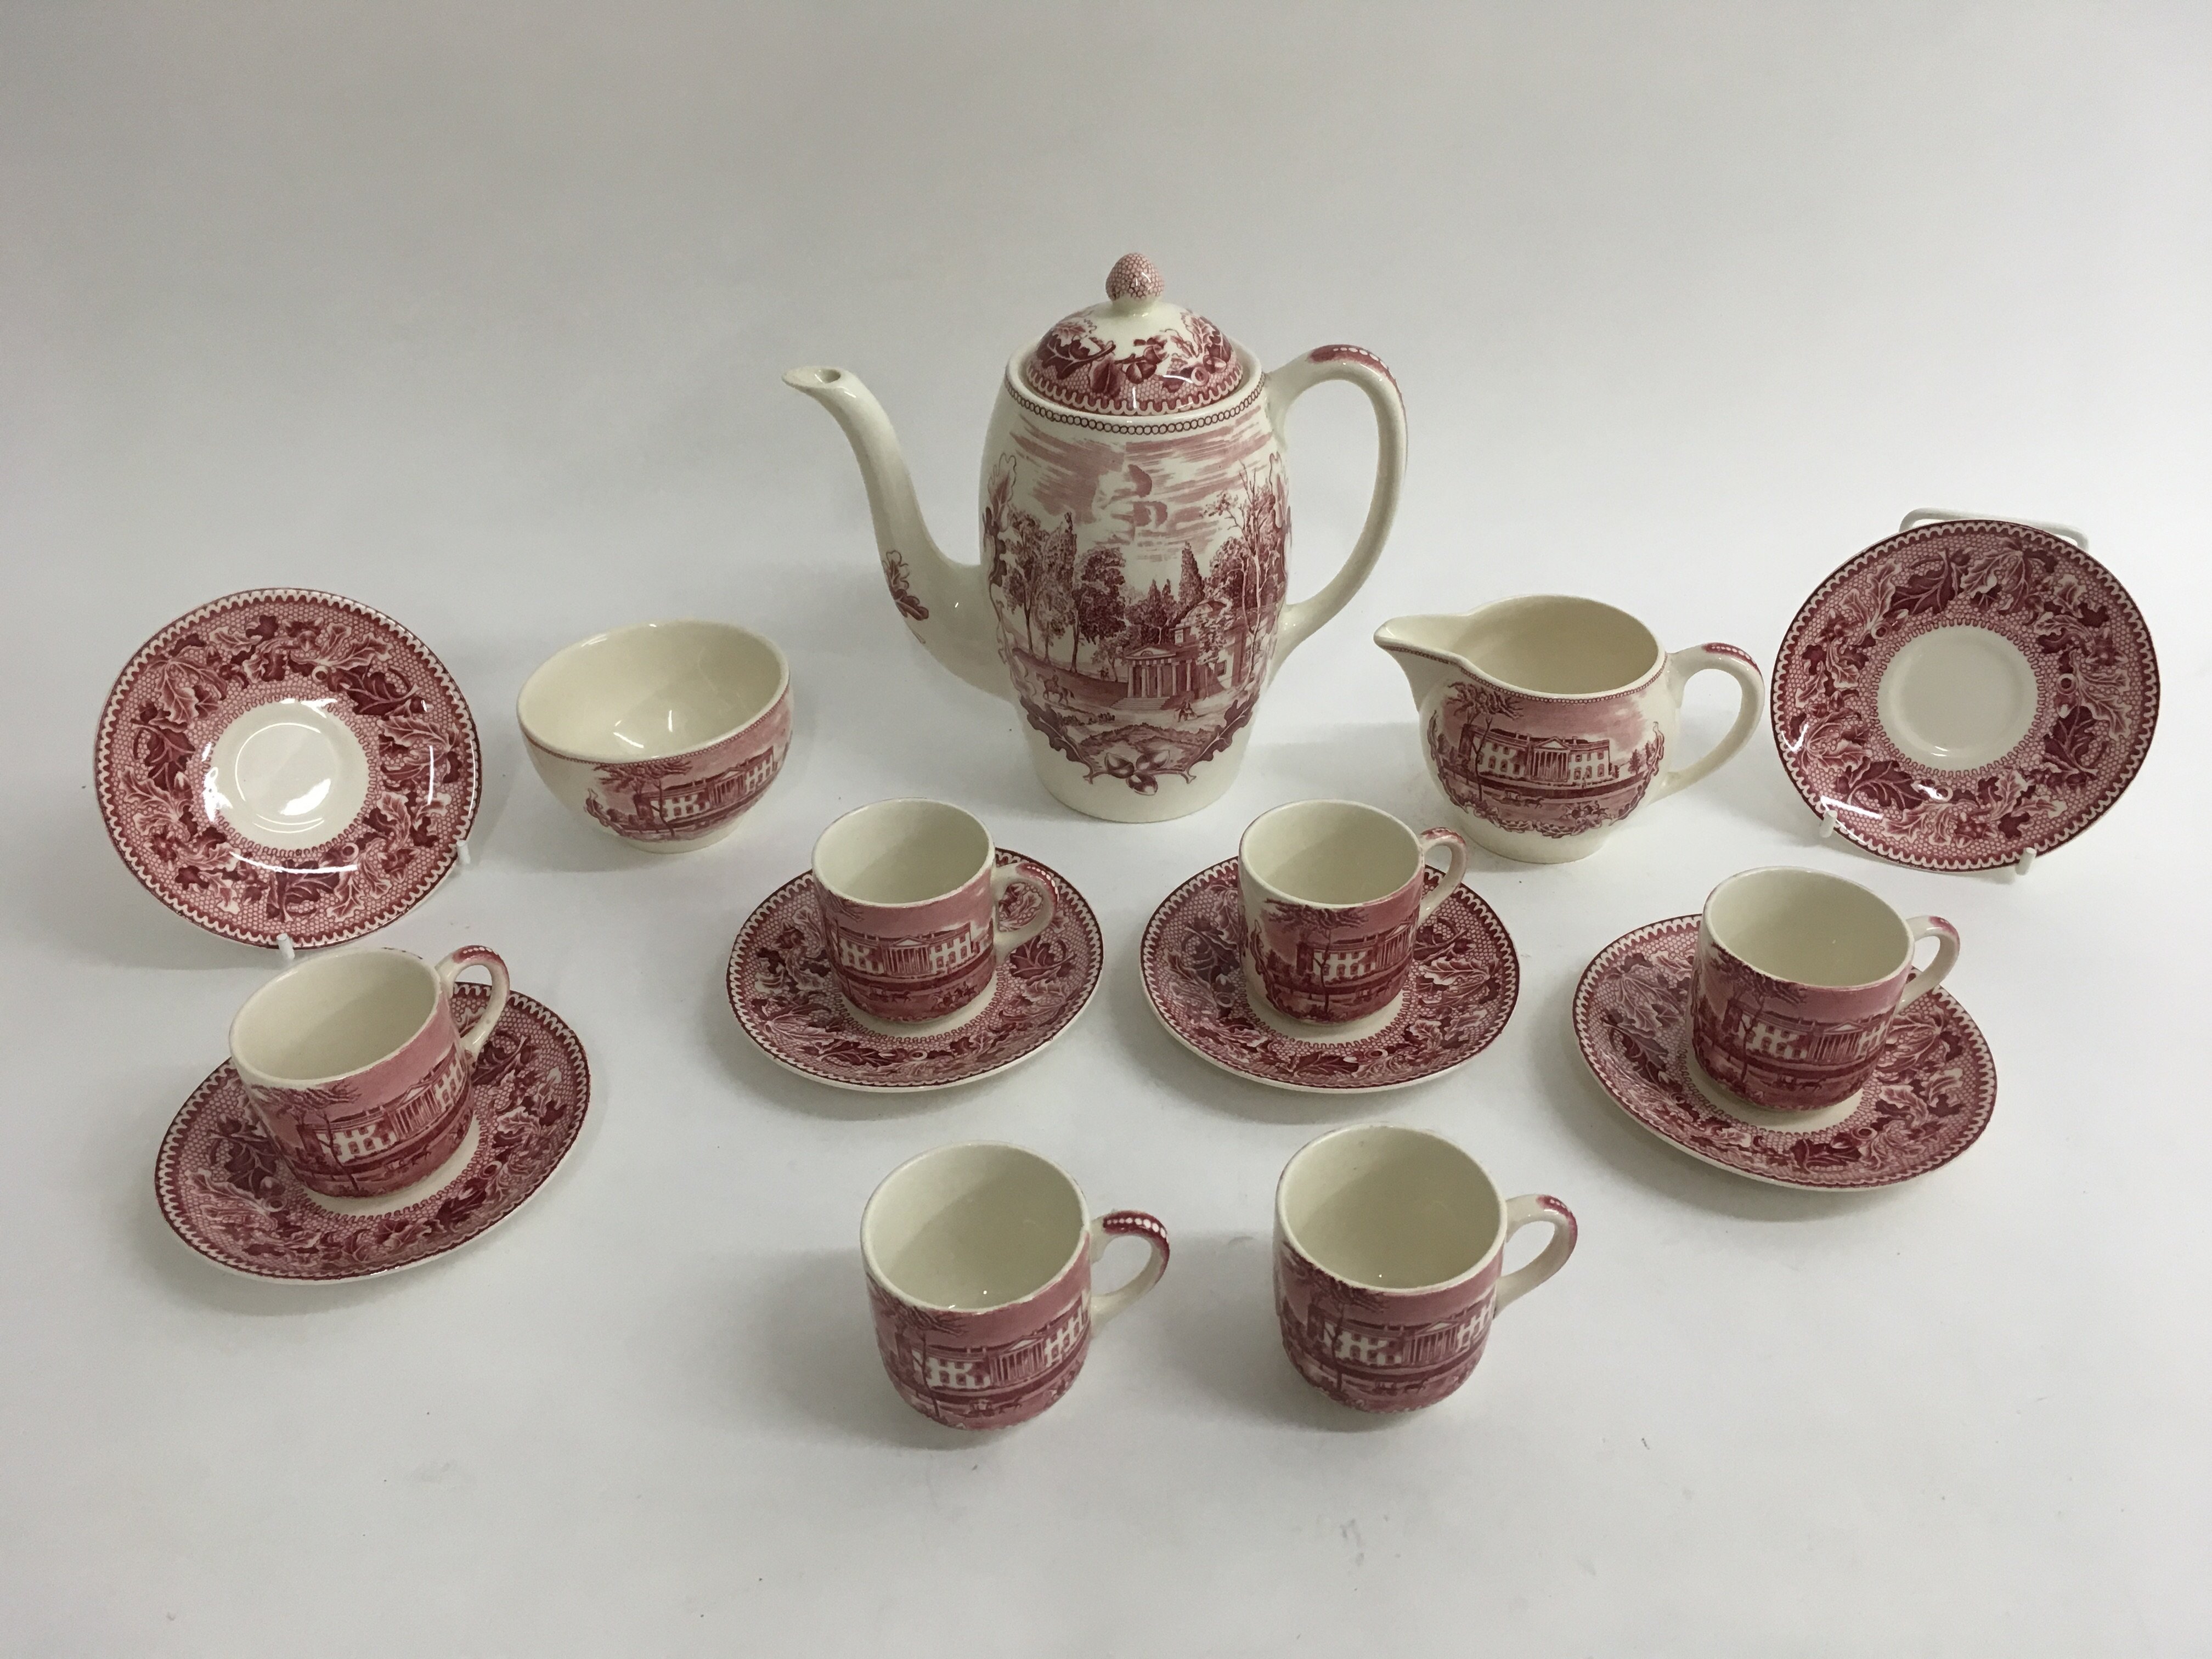 A Johnson Bros. coffee set complete with six cups